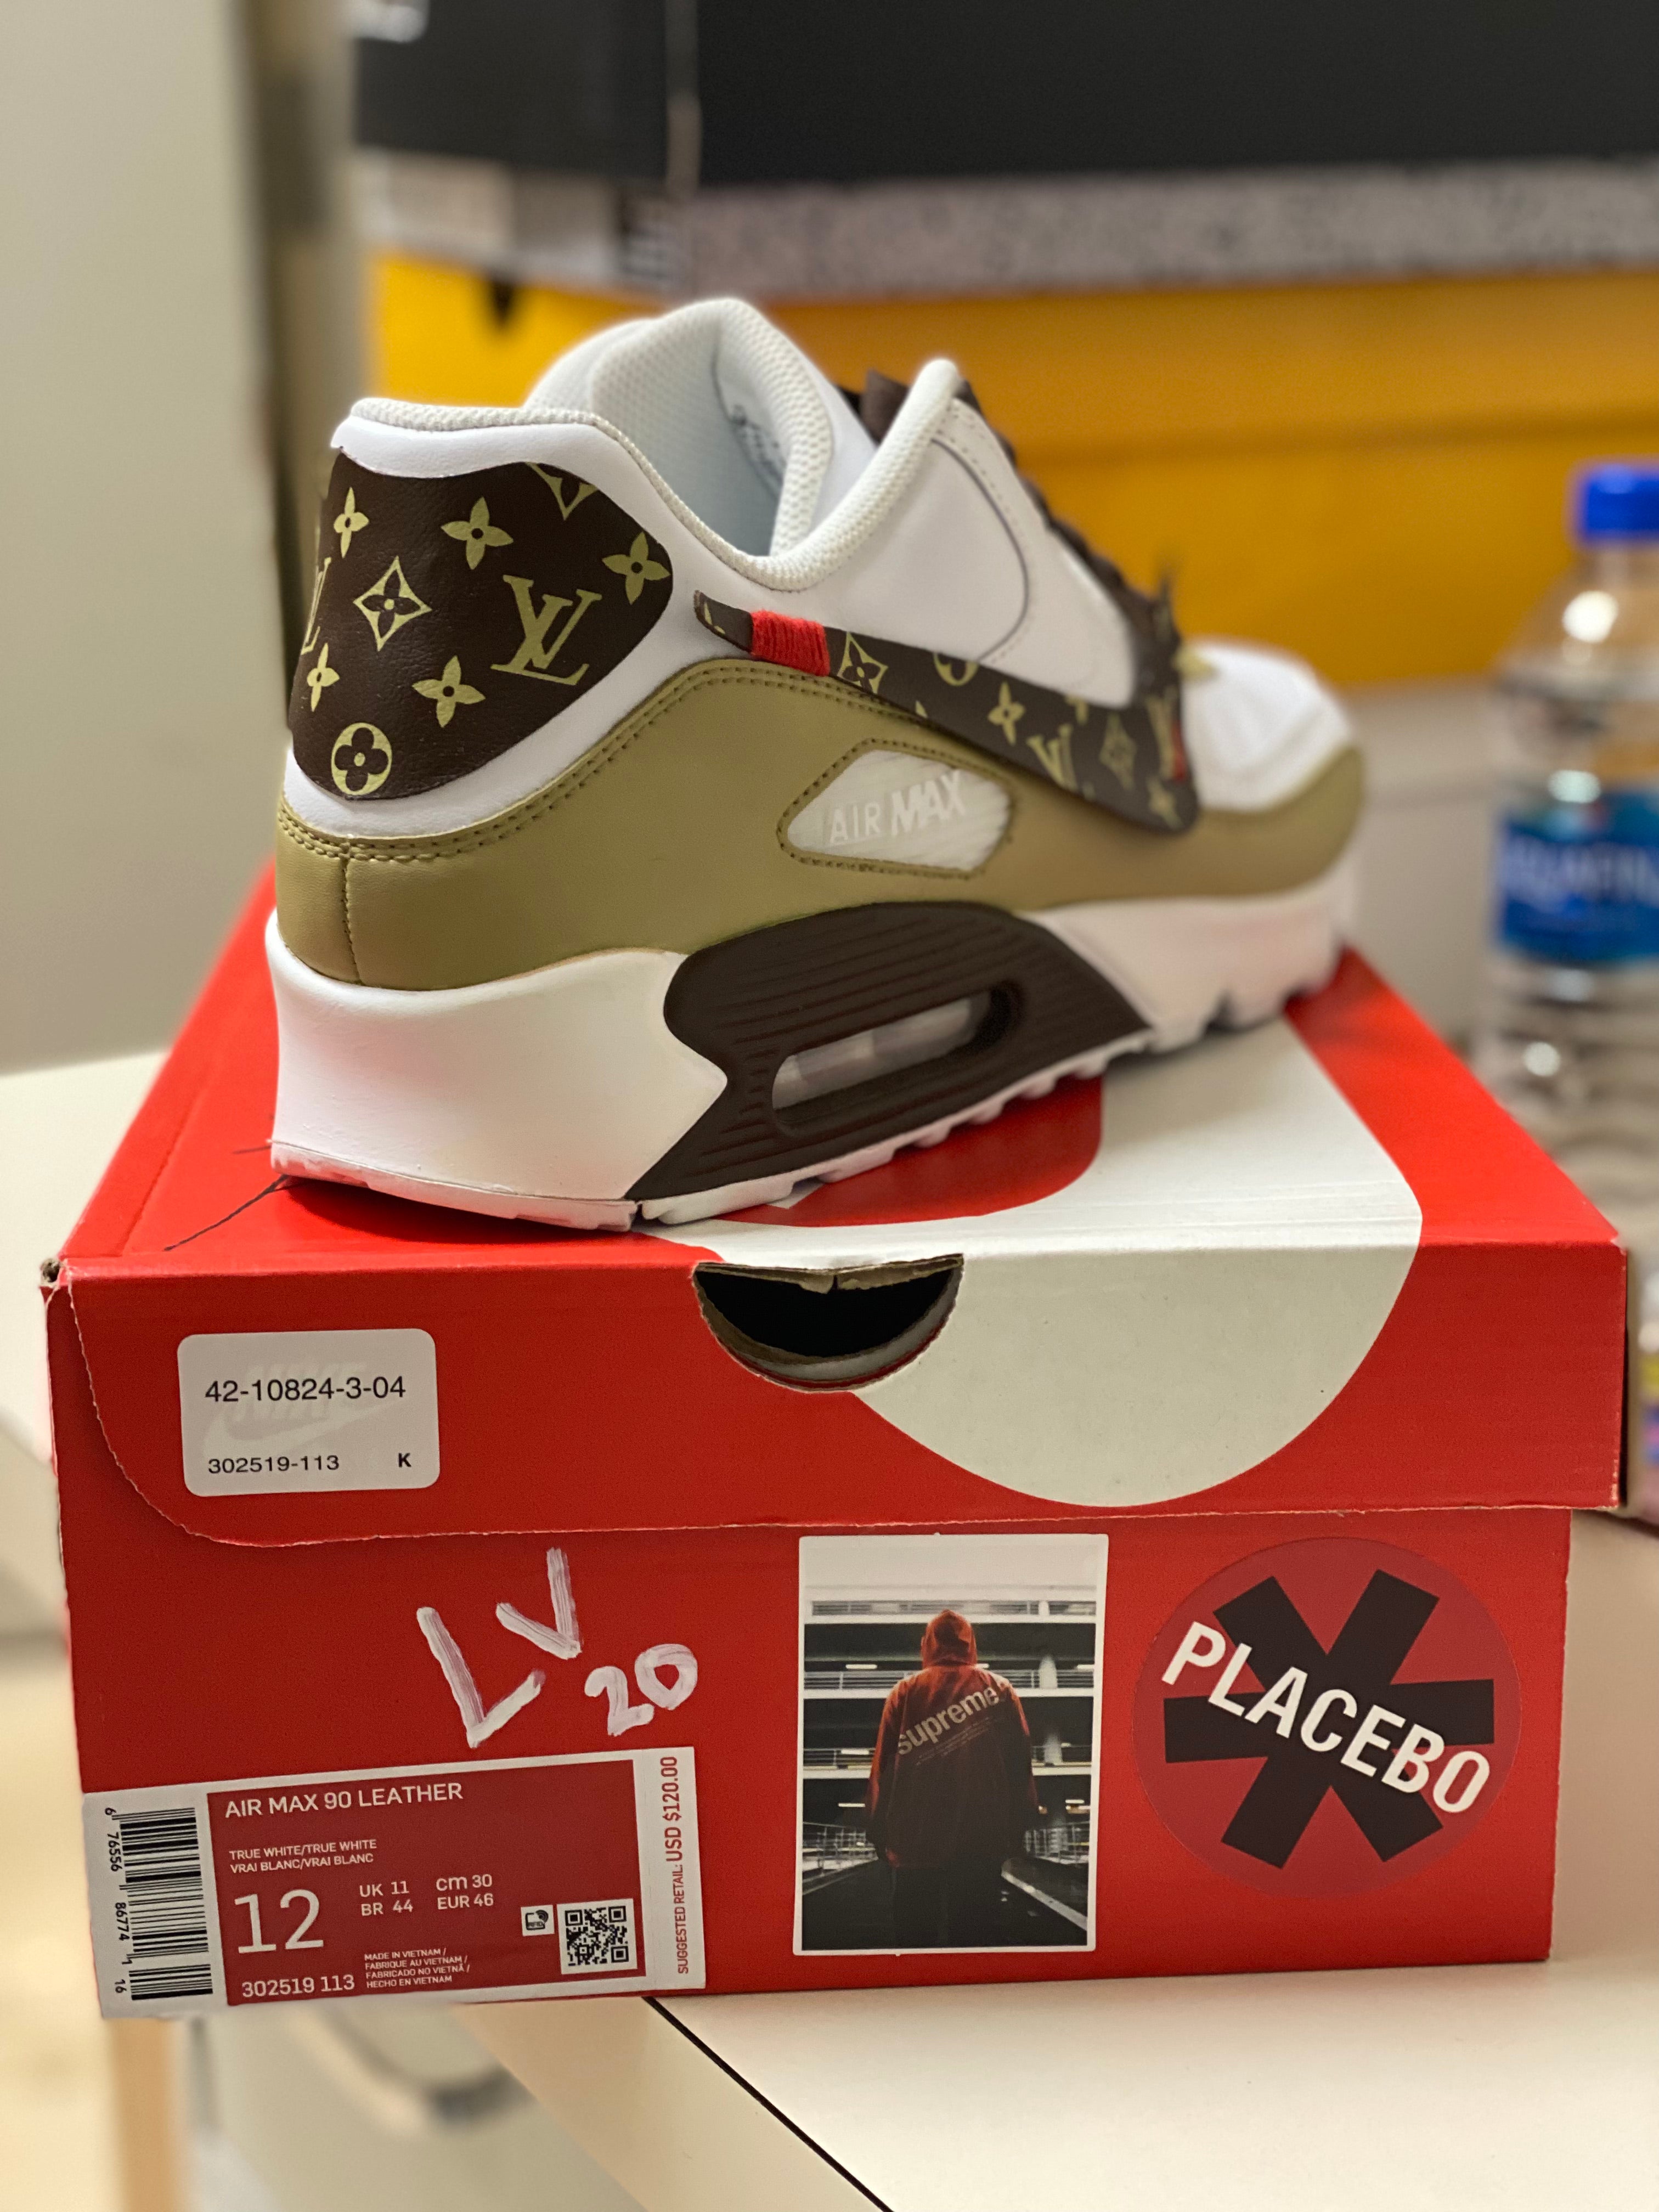 nike air max made in 1999 trailer for sale Low x LOUIS VUITTON LV